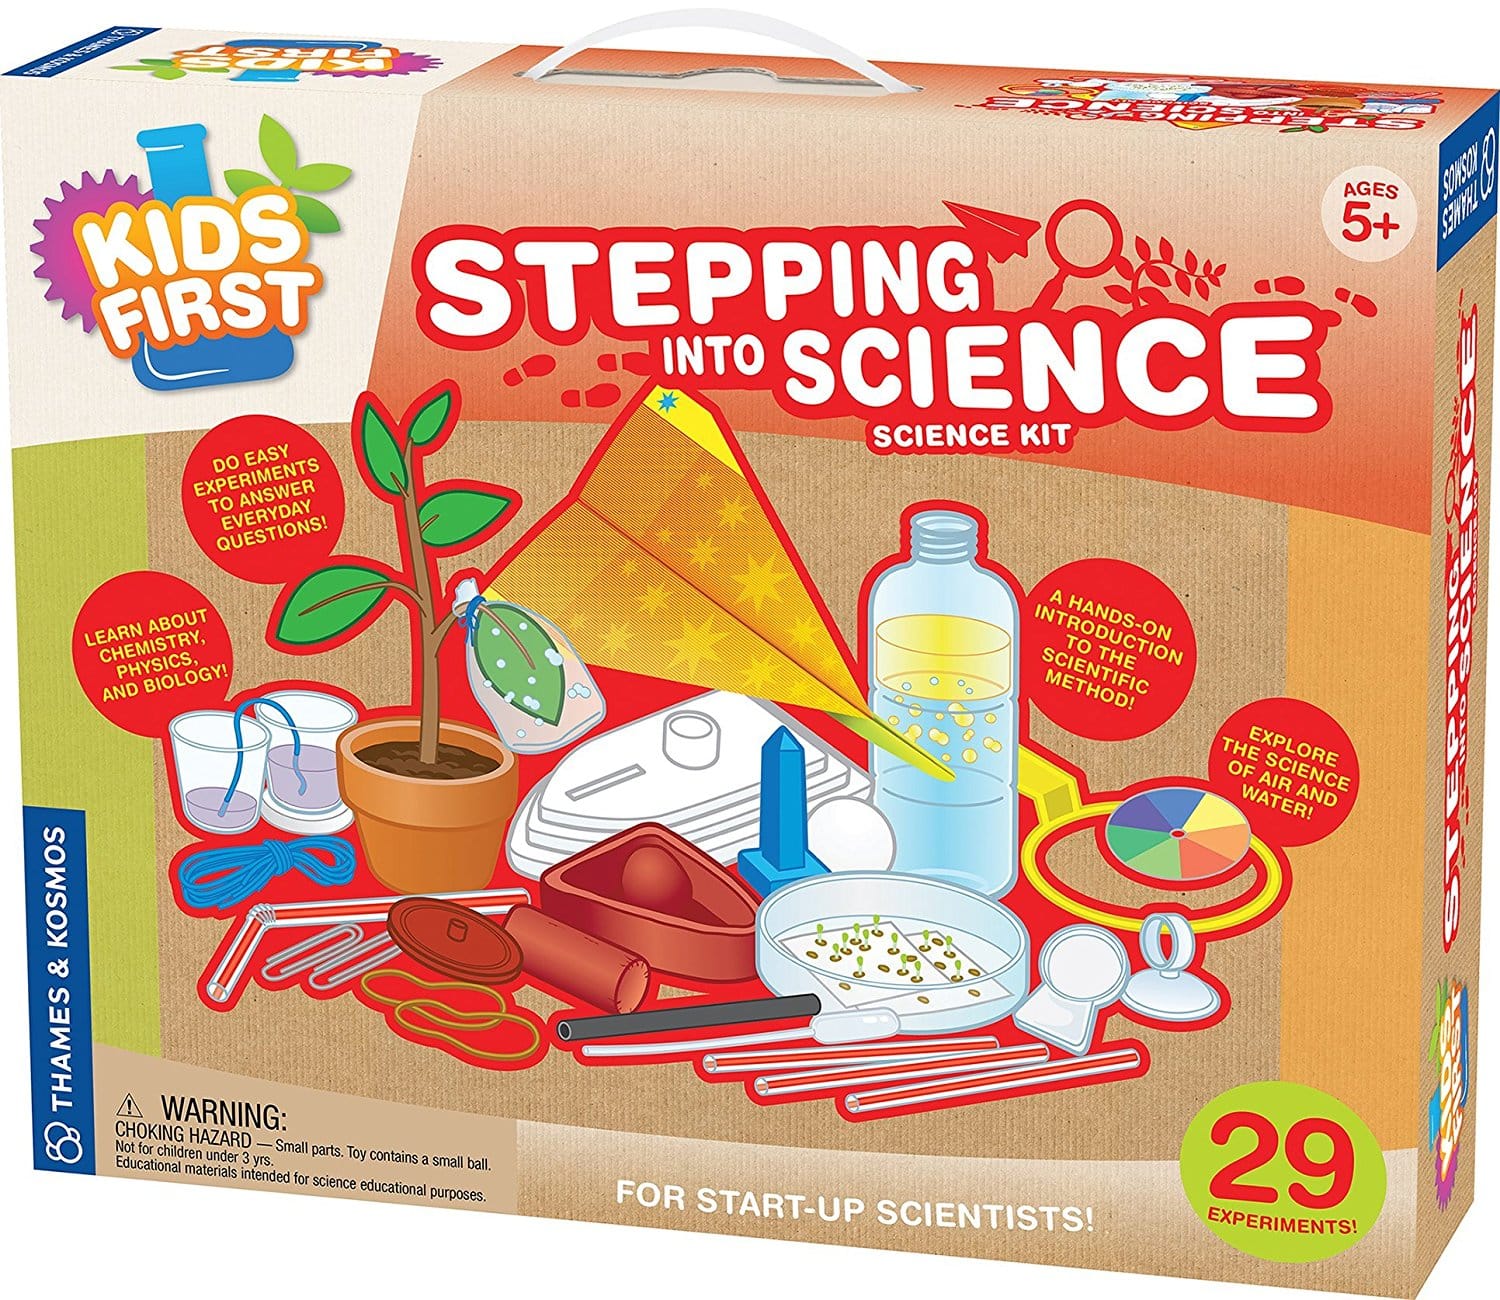 DEAL ALERT: Kids First Stepping into Science Toy – 36%